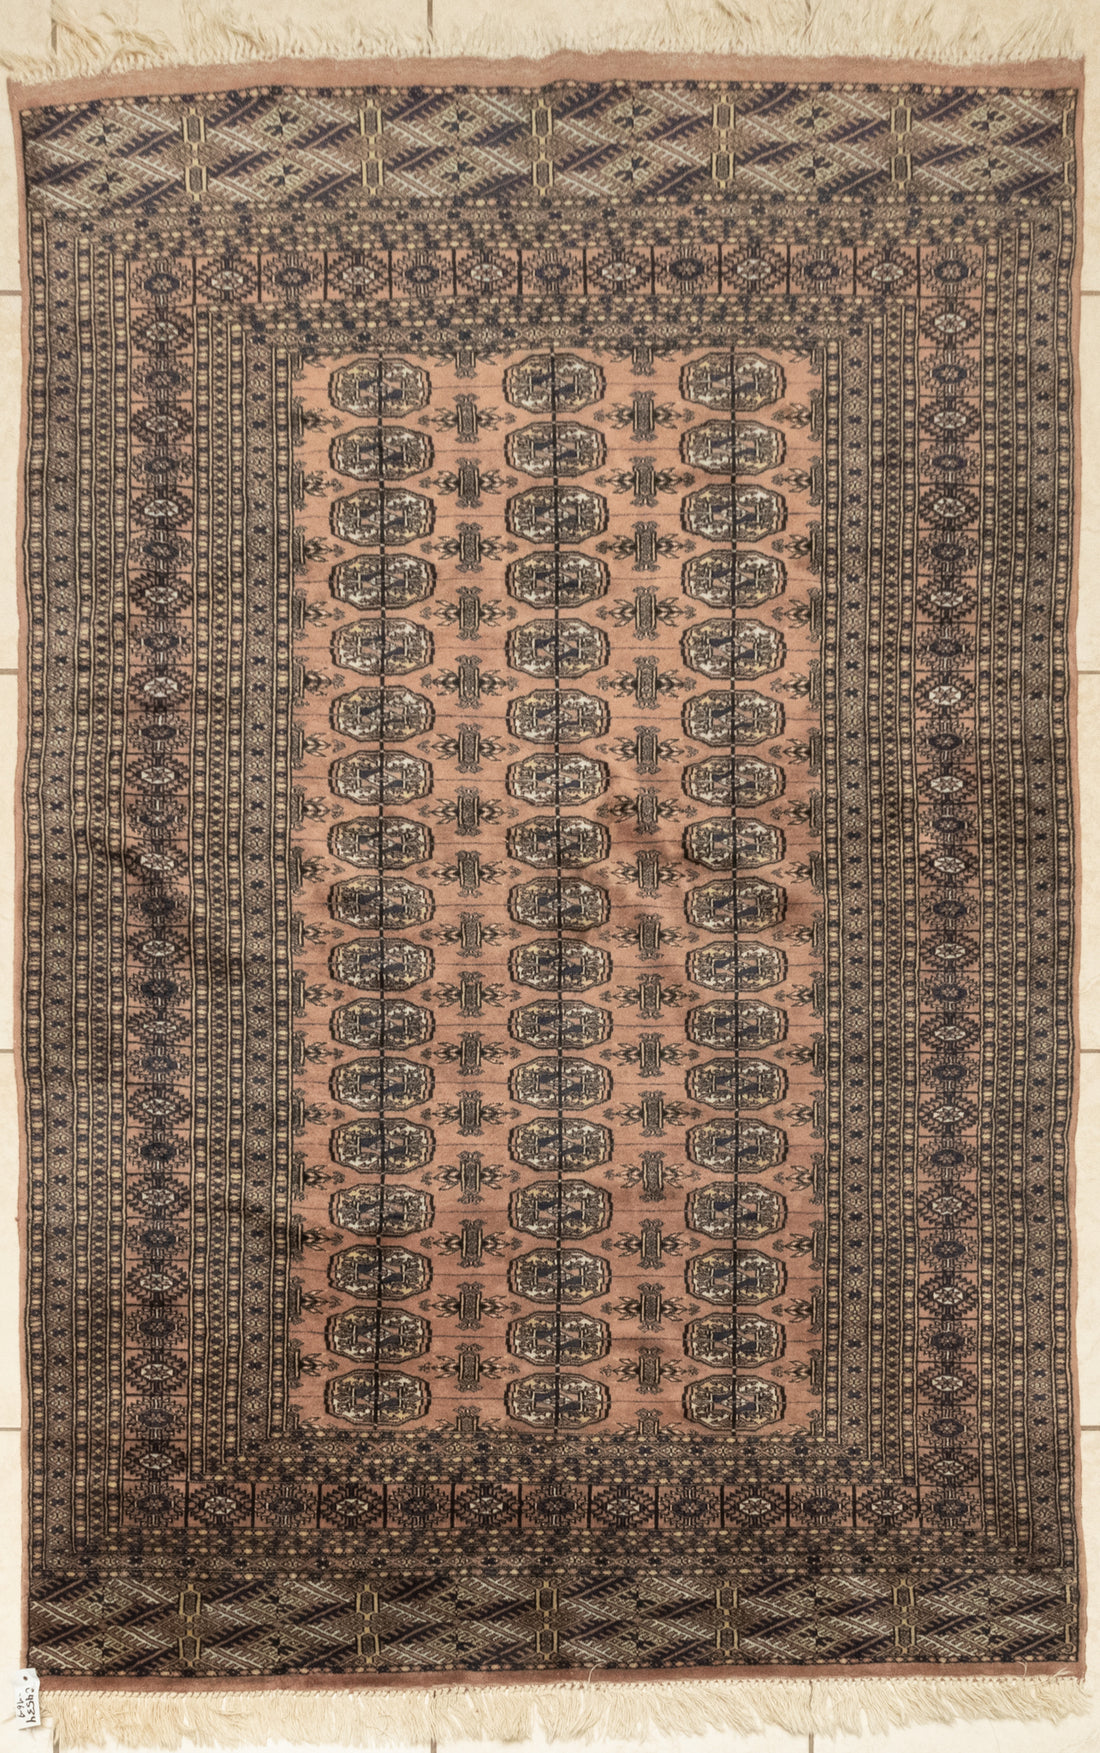 Hand-Knotted Wool Bokhara Rug 6'6" x 4'2"